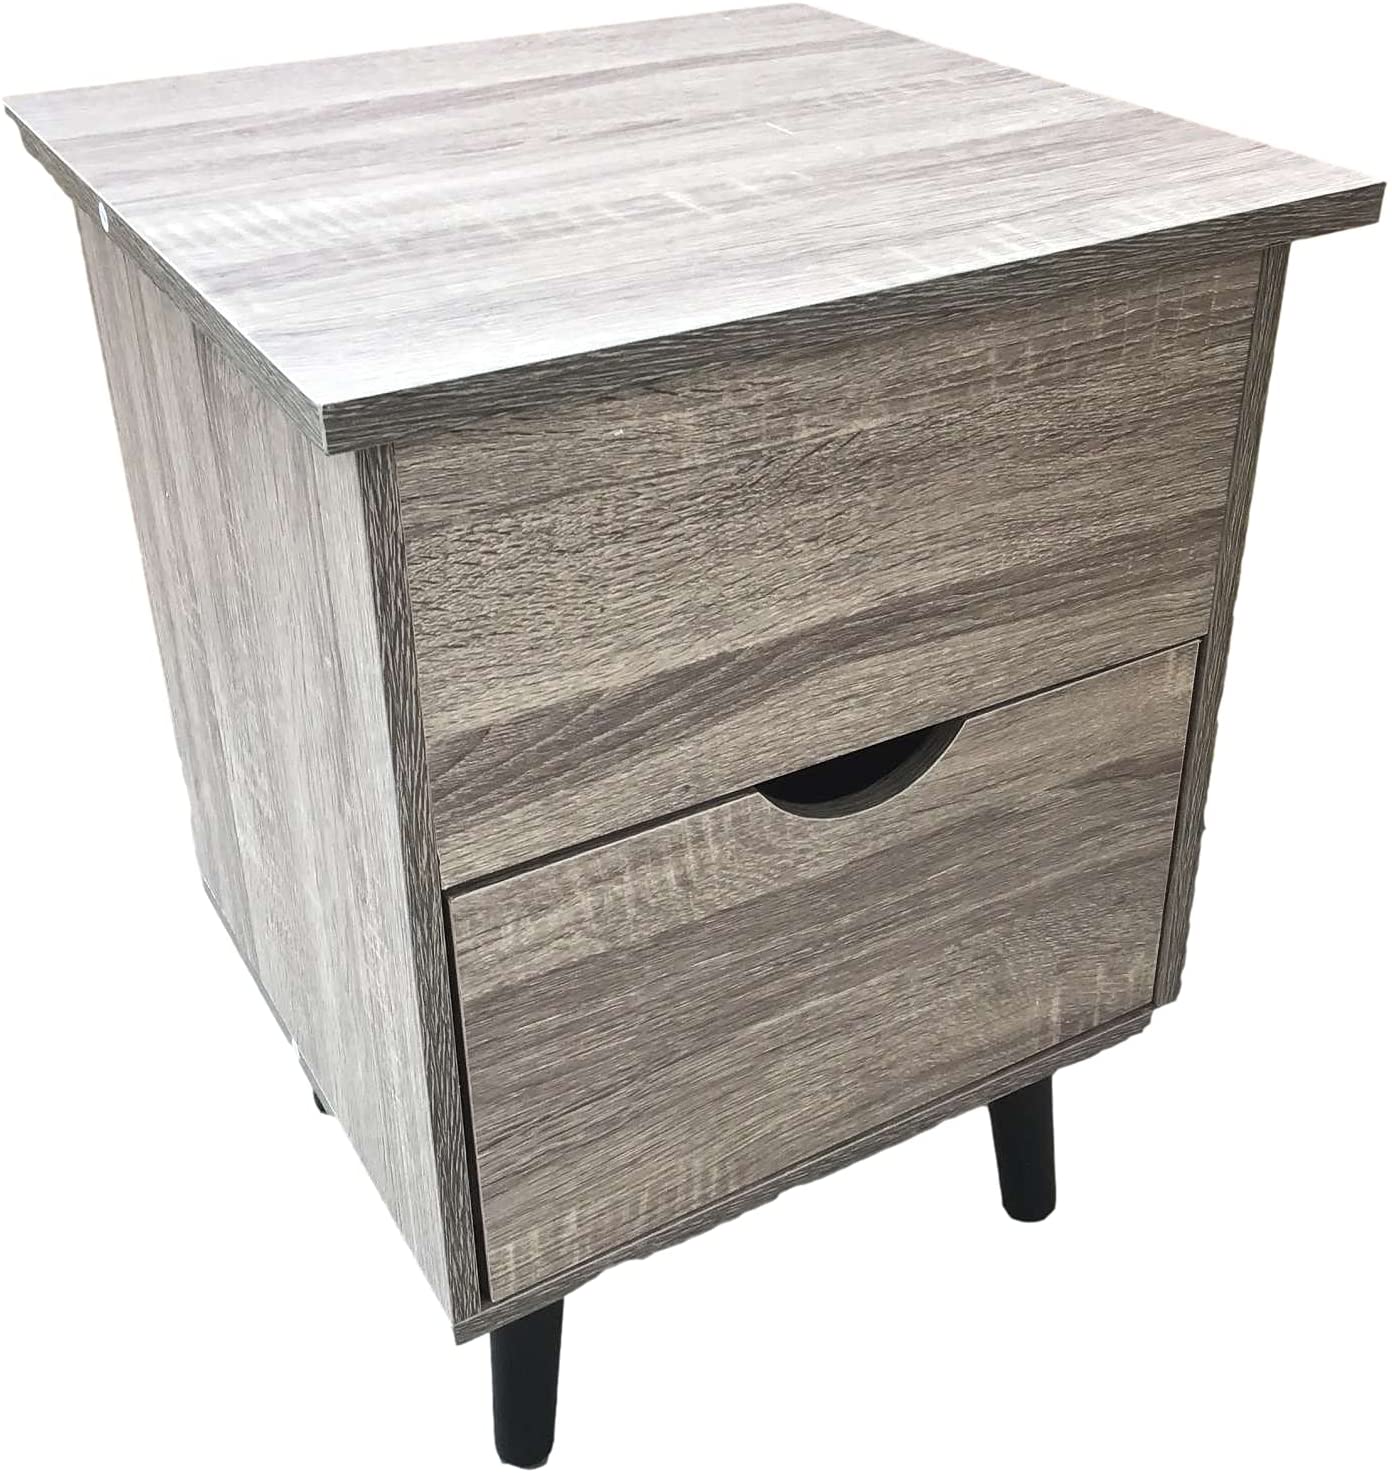 Wooden Brown Extendable Lift Top Bedside Table Nightstand With Storage Drawer